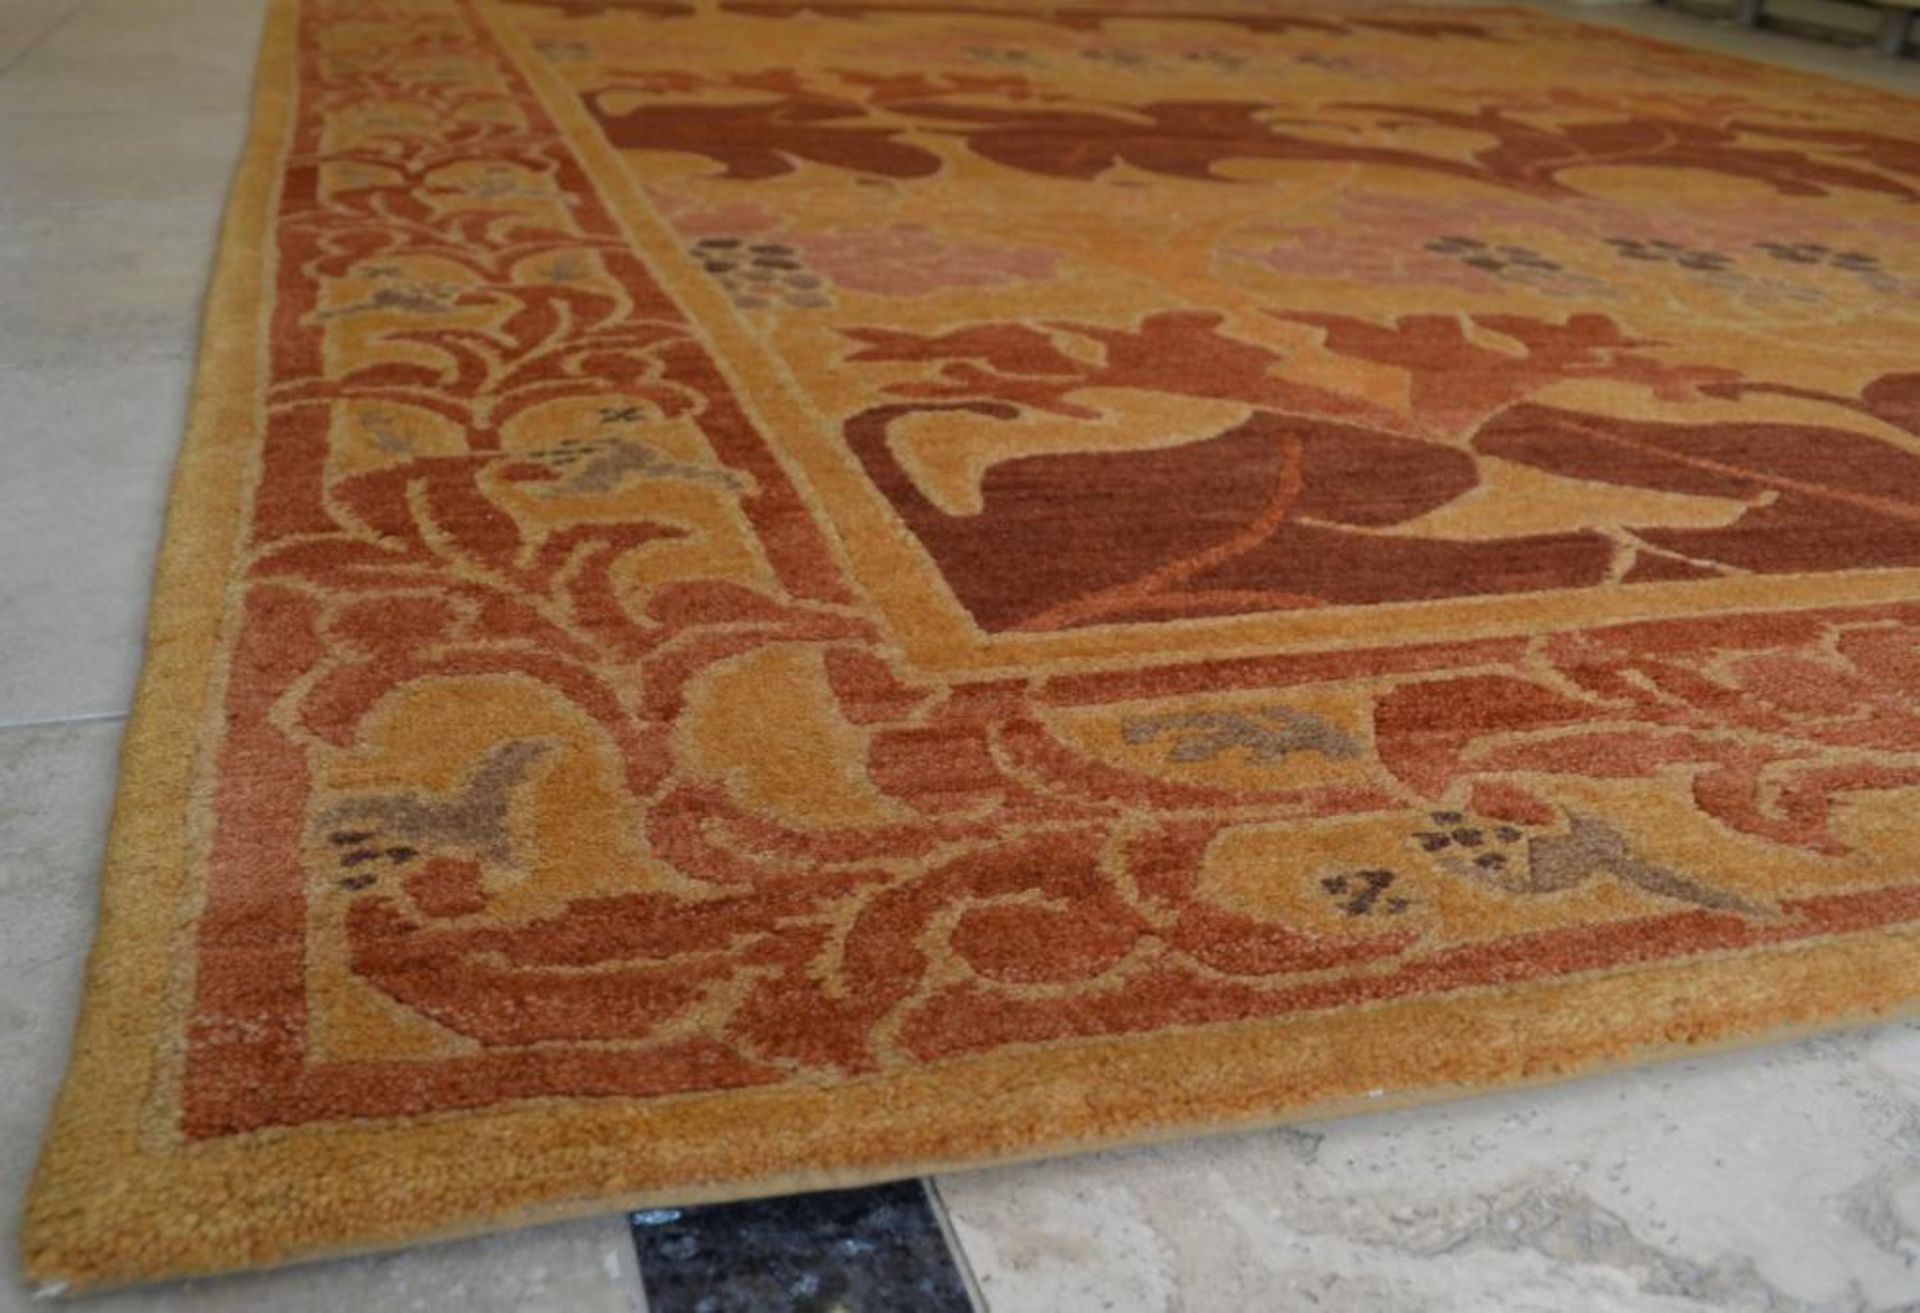 1 x Nepalese Terracotta Arts & Crafts Design Hand Knotted Rug - 100% Handspun Wool - Dimensions: - Image 7 of 18